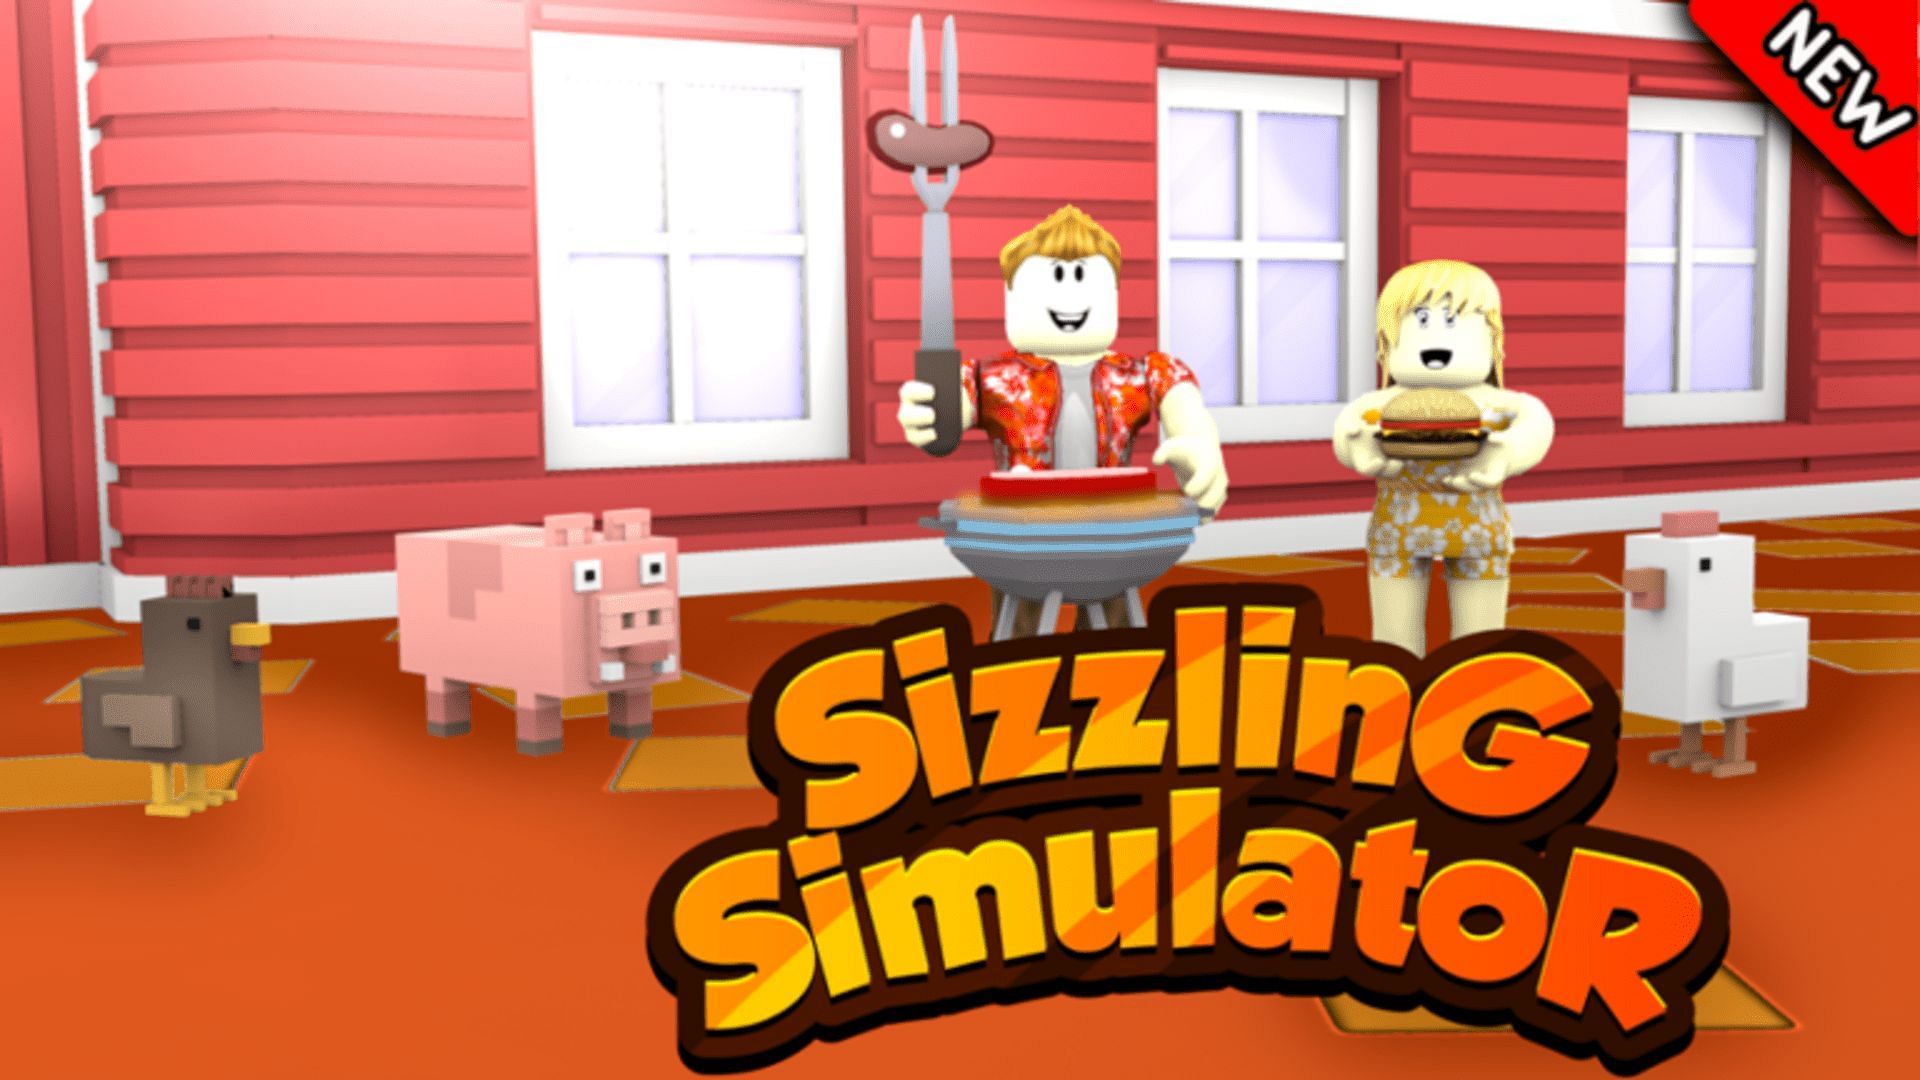 Active codes for Sizzling Simulator (Image via Roblox)